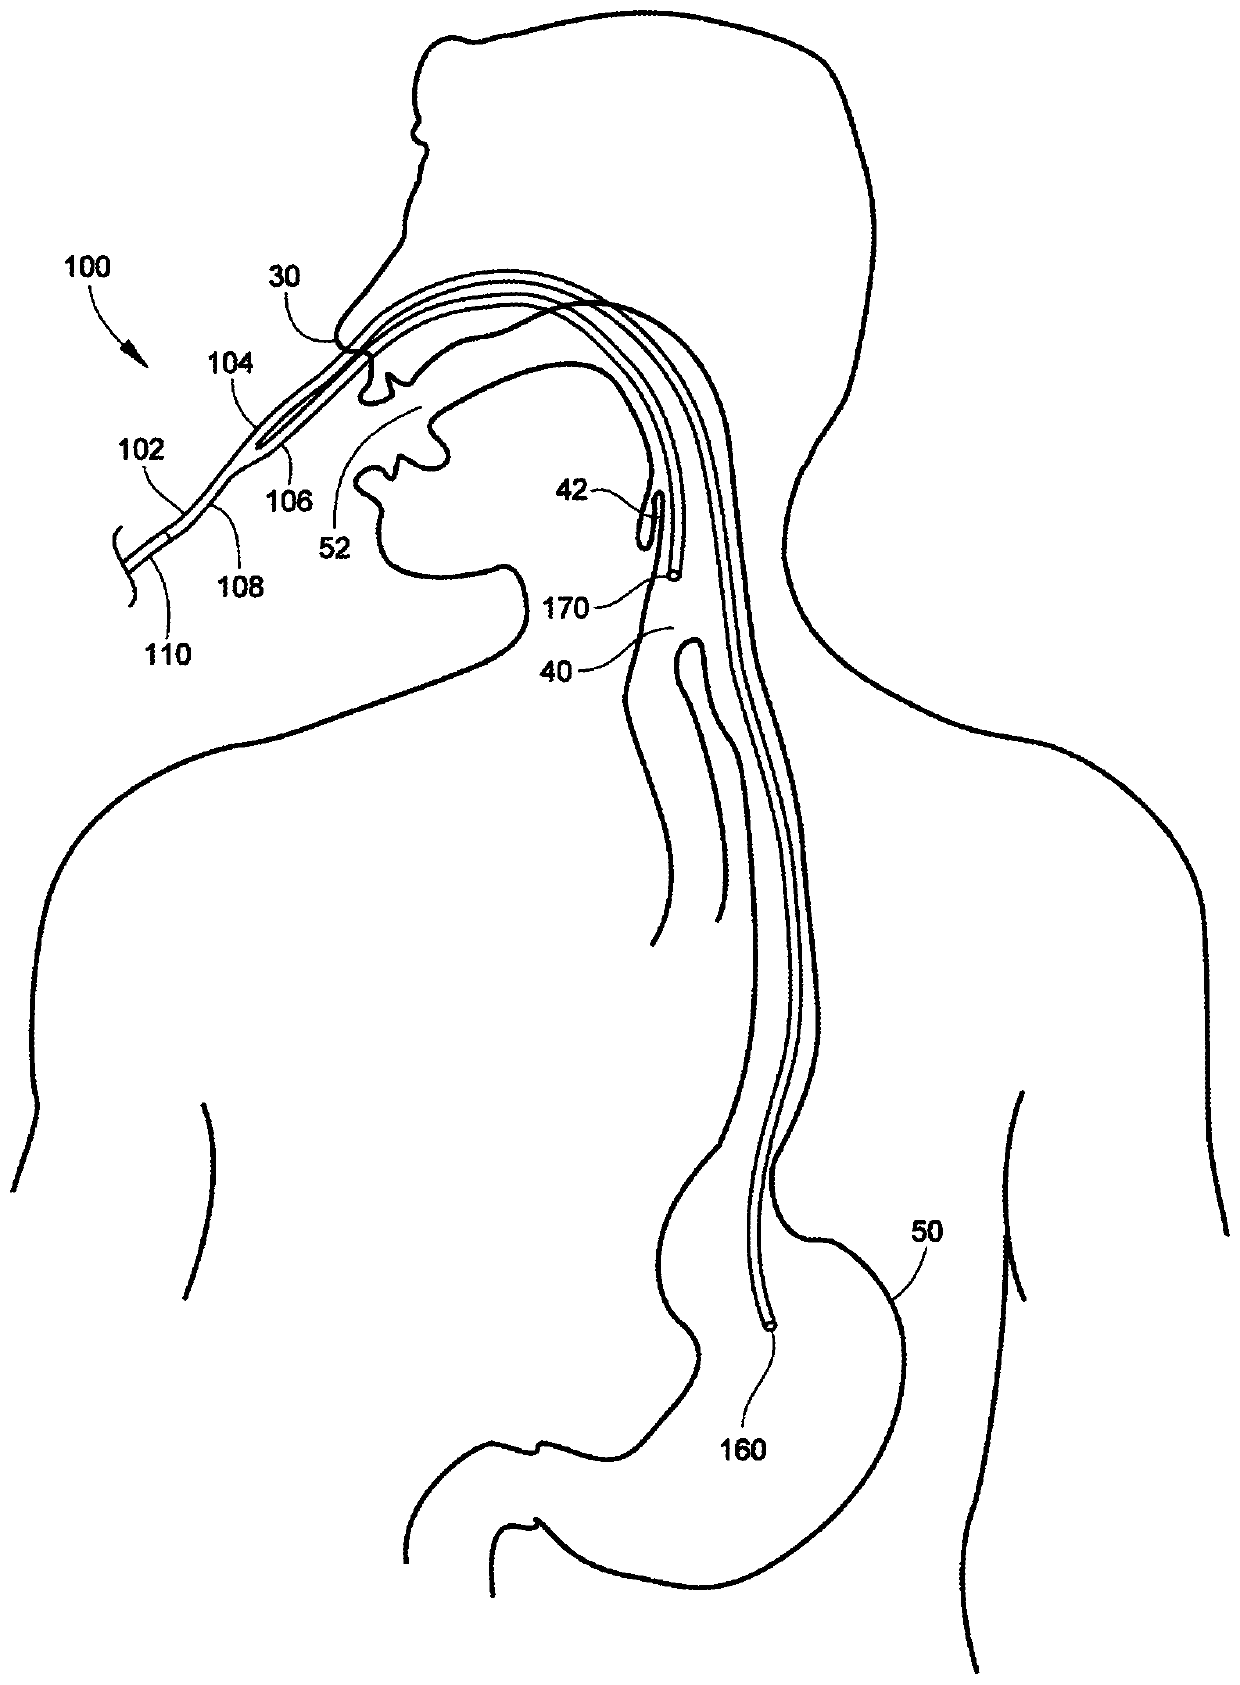 Medical apparatus with hypopharyngeal suctioning capability